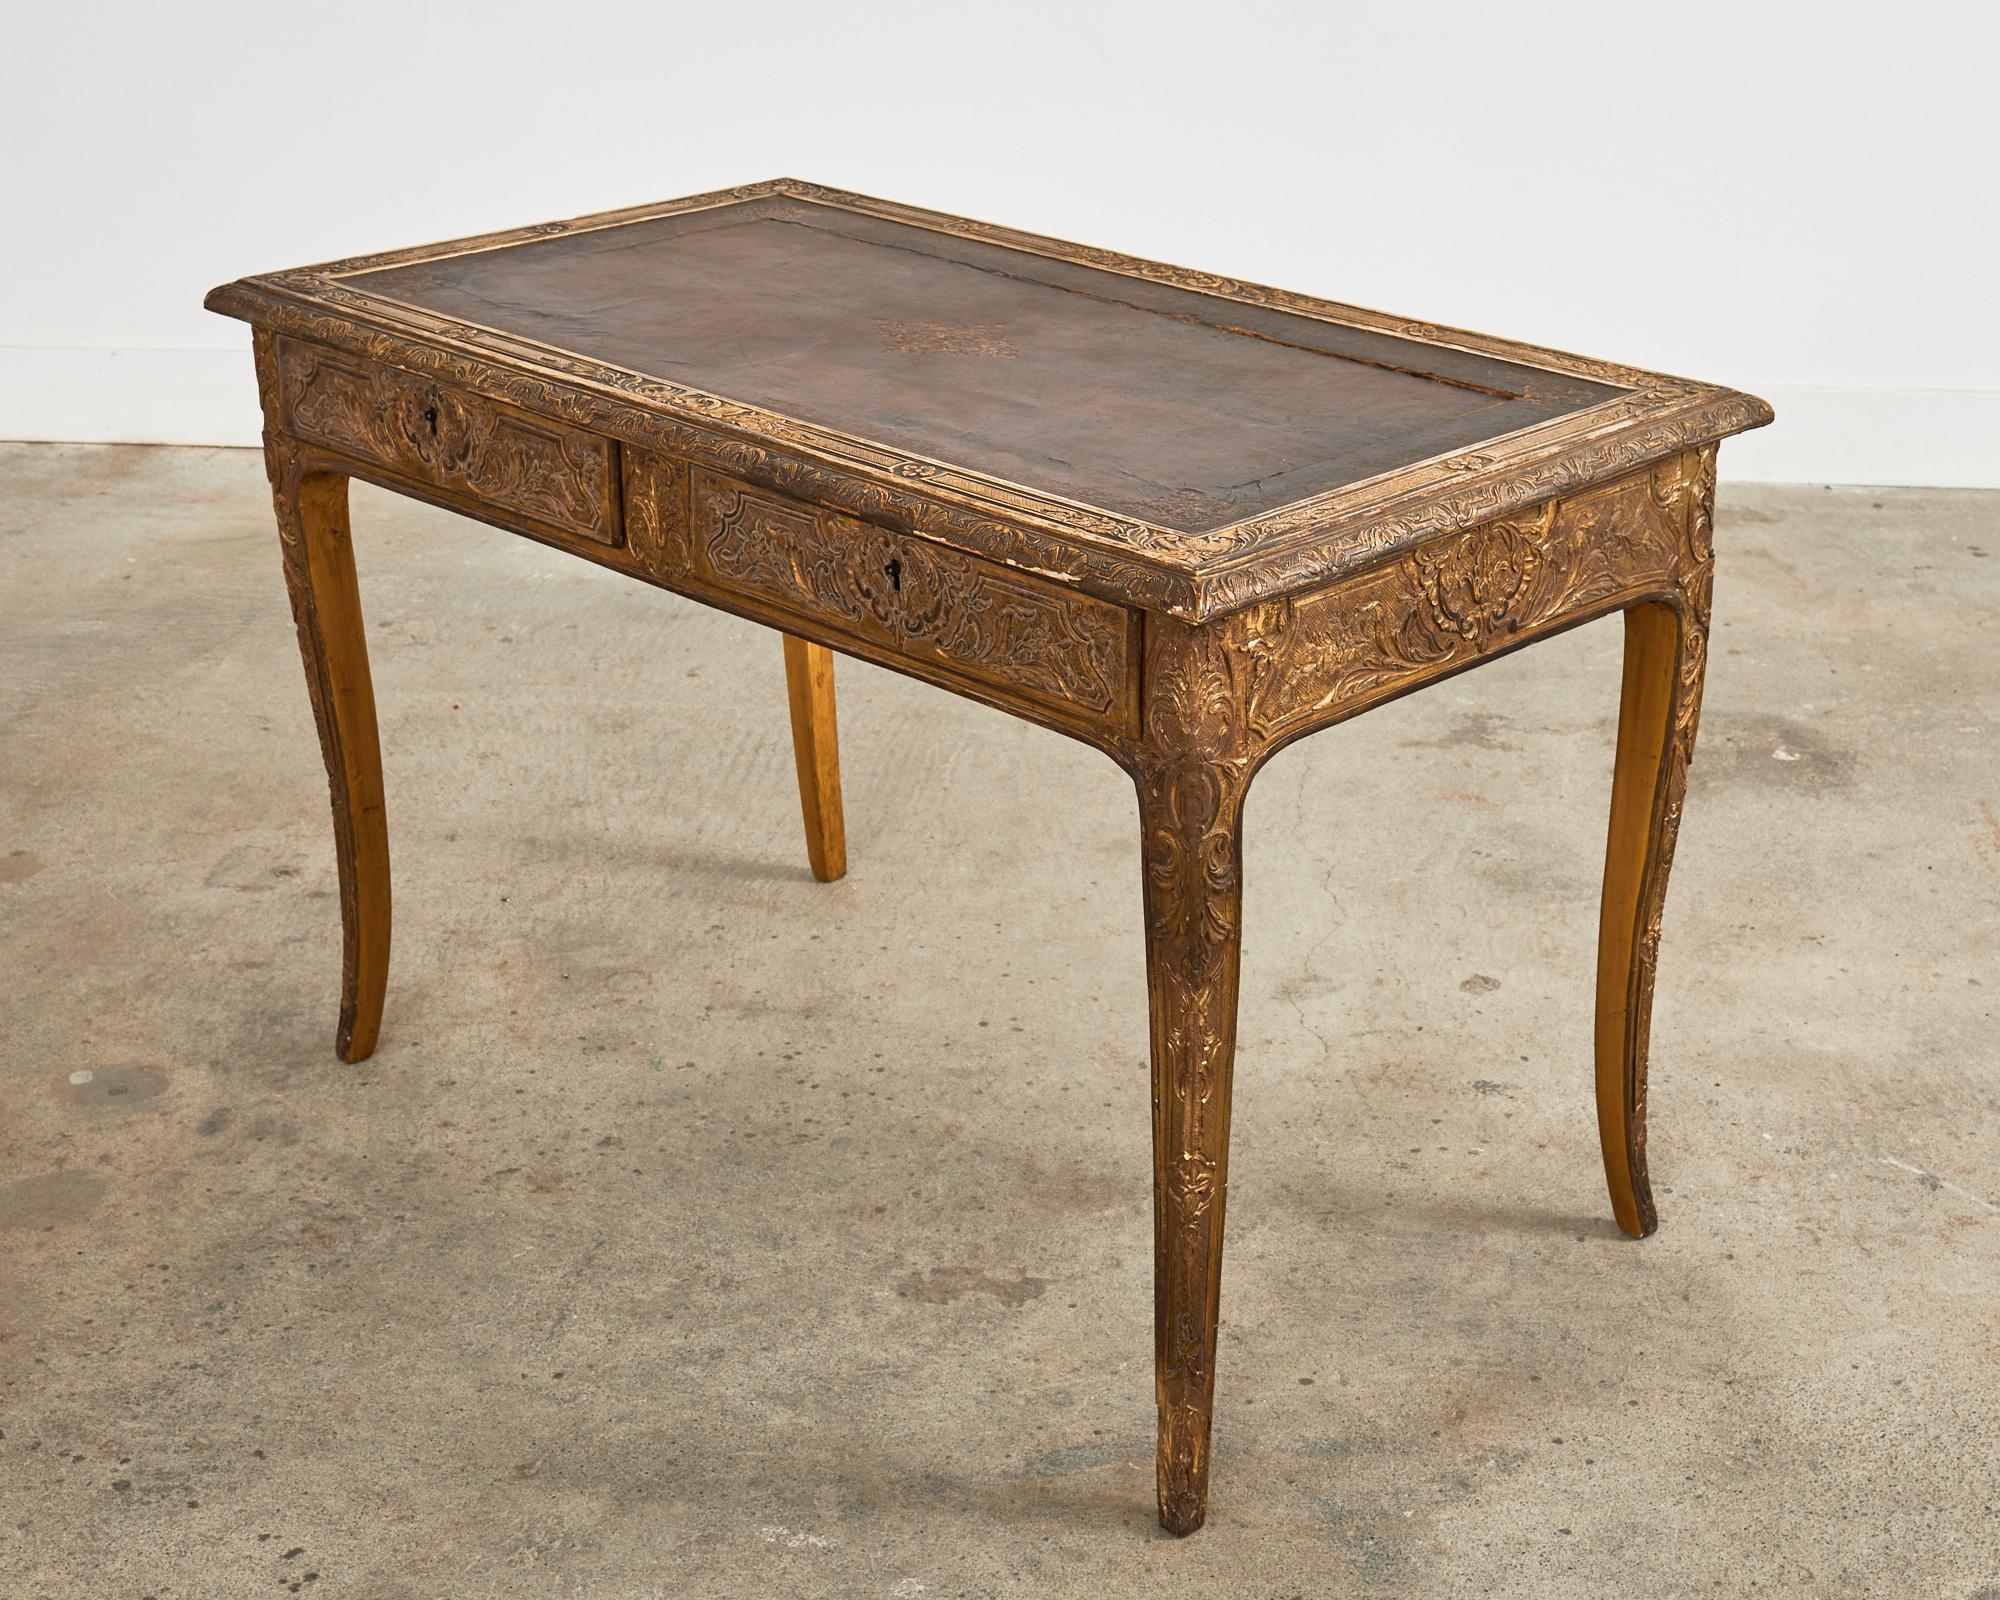 19th Century Louis XV Style Gilt Carved Writing Table Desk In Distressed Condition For Sale In Rio Vista, CA